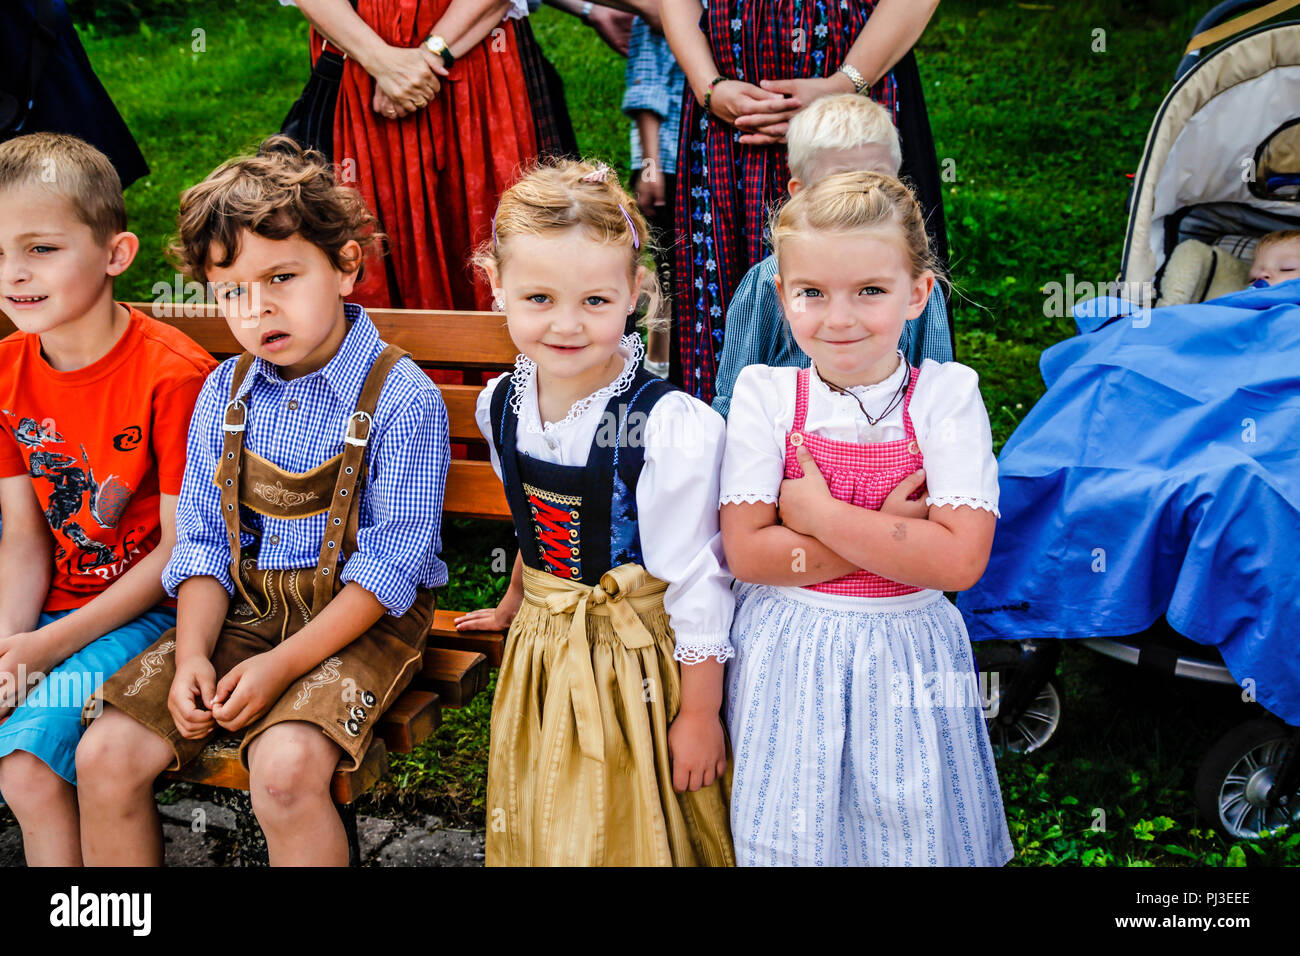 Children in Tyrolean traditional dress of lederhosen for boys and dirndl's  for girls attend Patronage day in Reith bei Seefeld, Austria Stock Photo -  Alamy